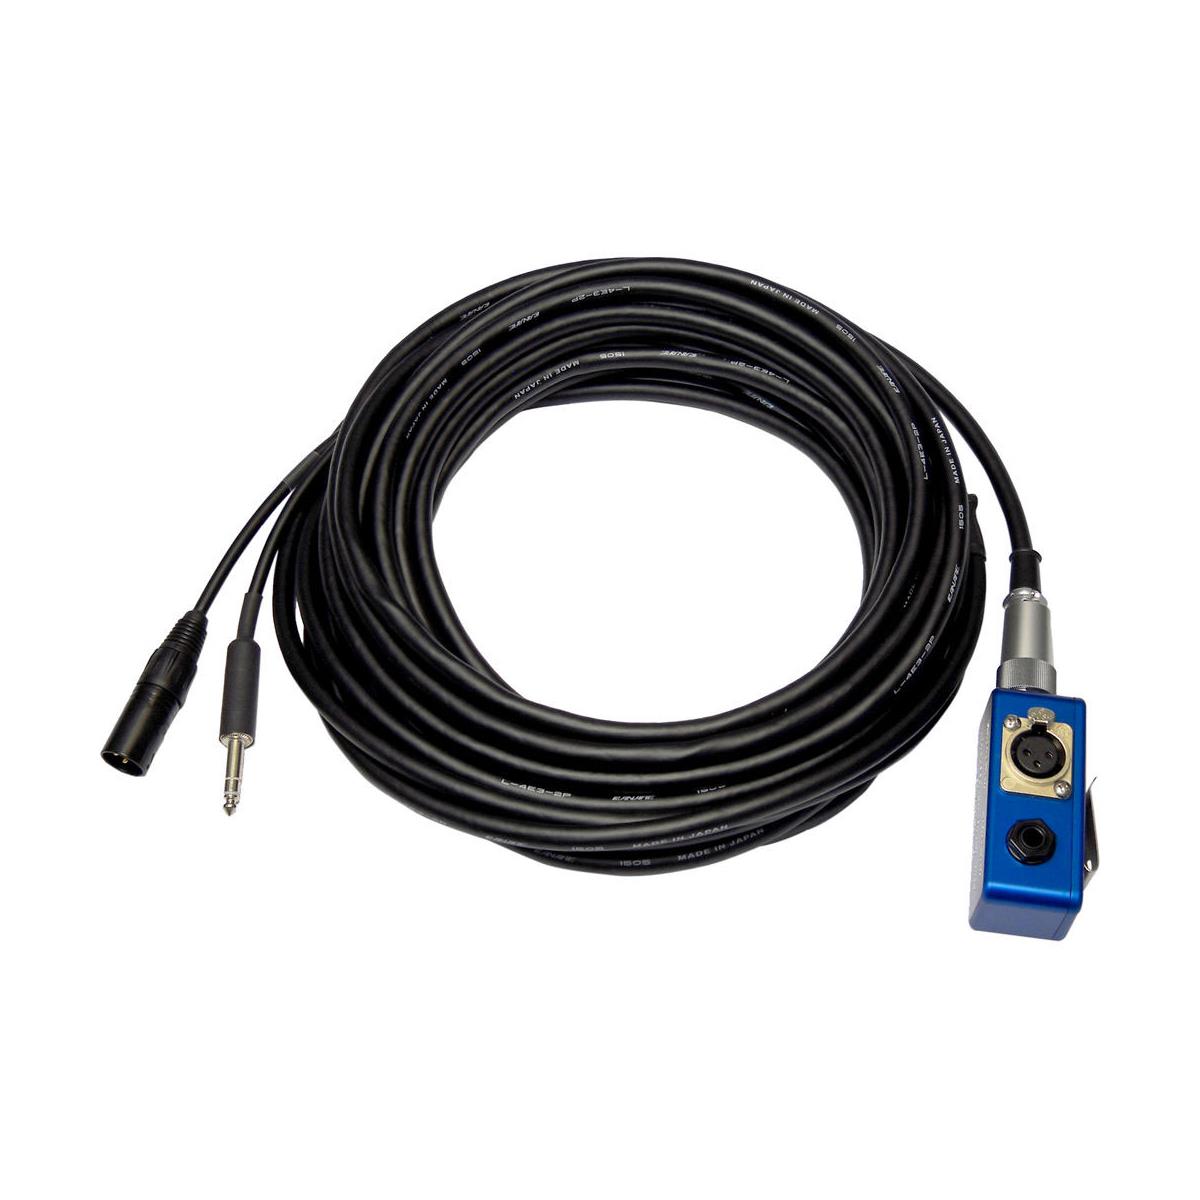 Image of PSC 75' Duplex Boom Cable with Breakout Box